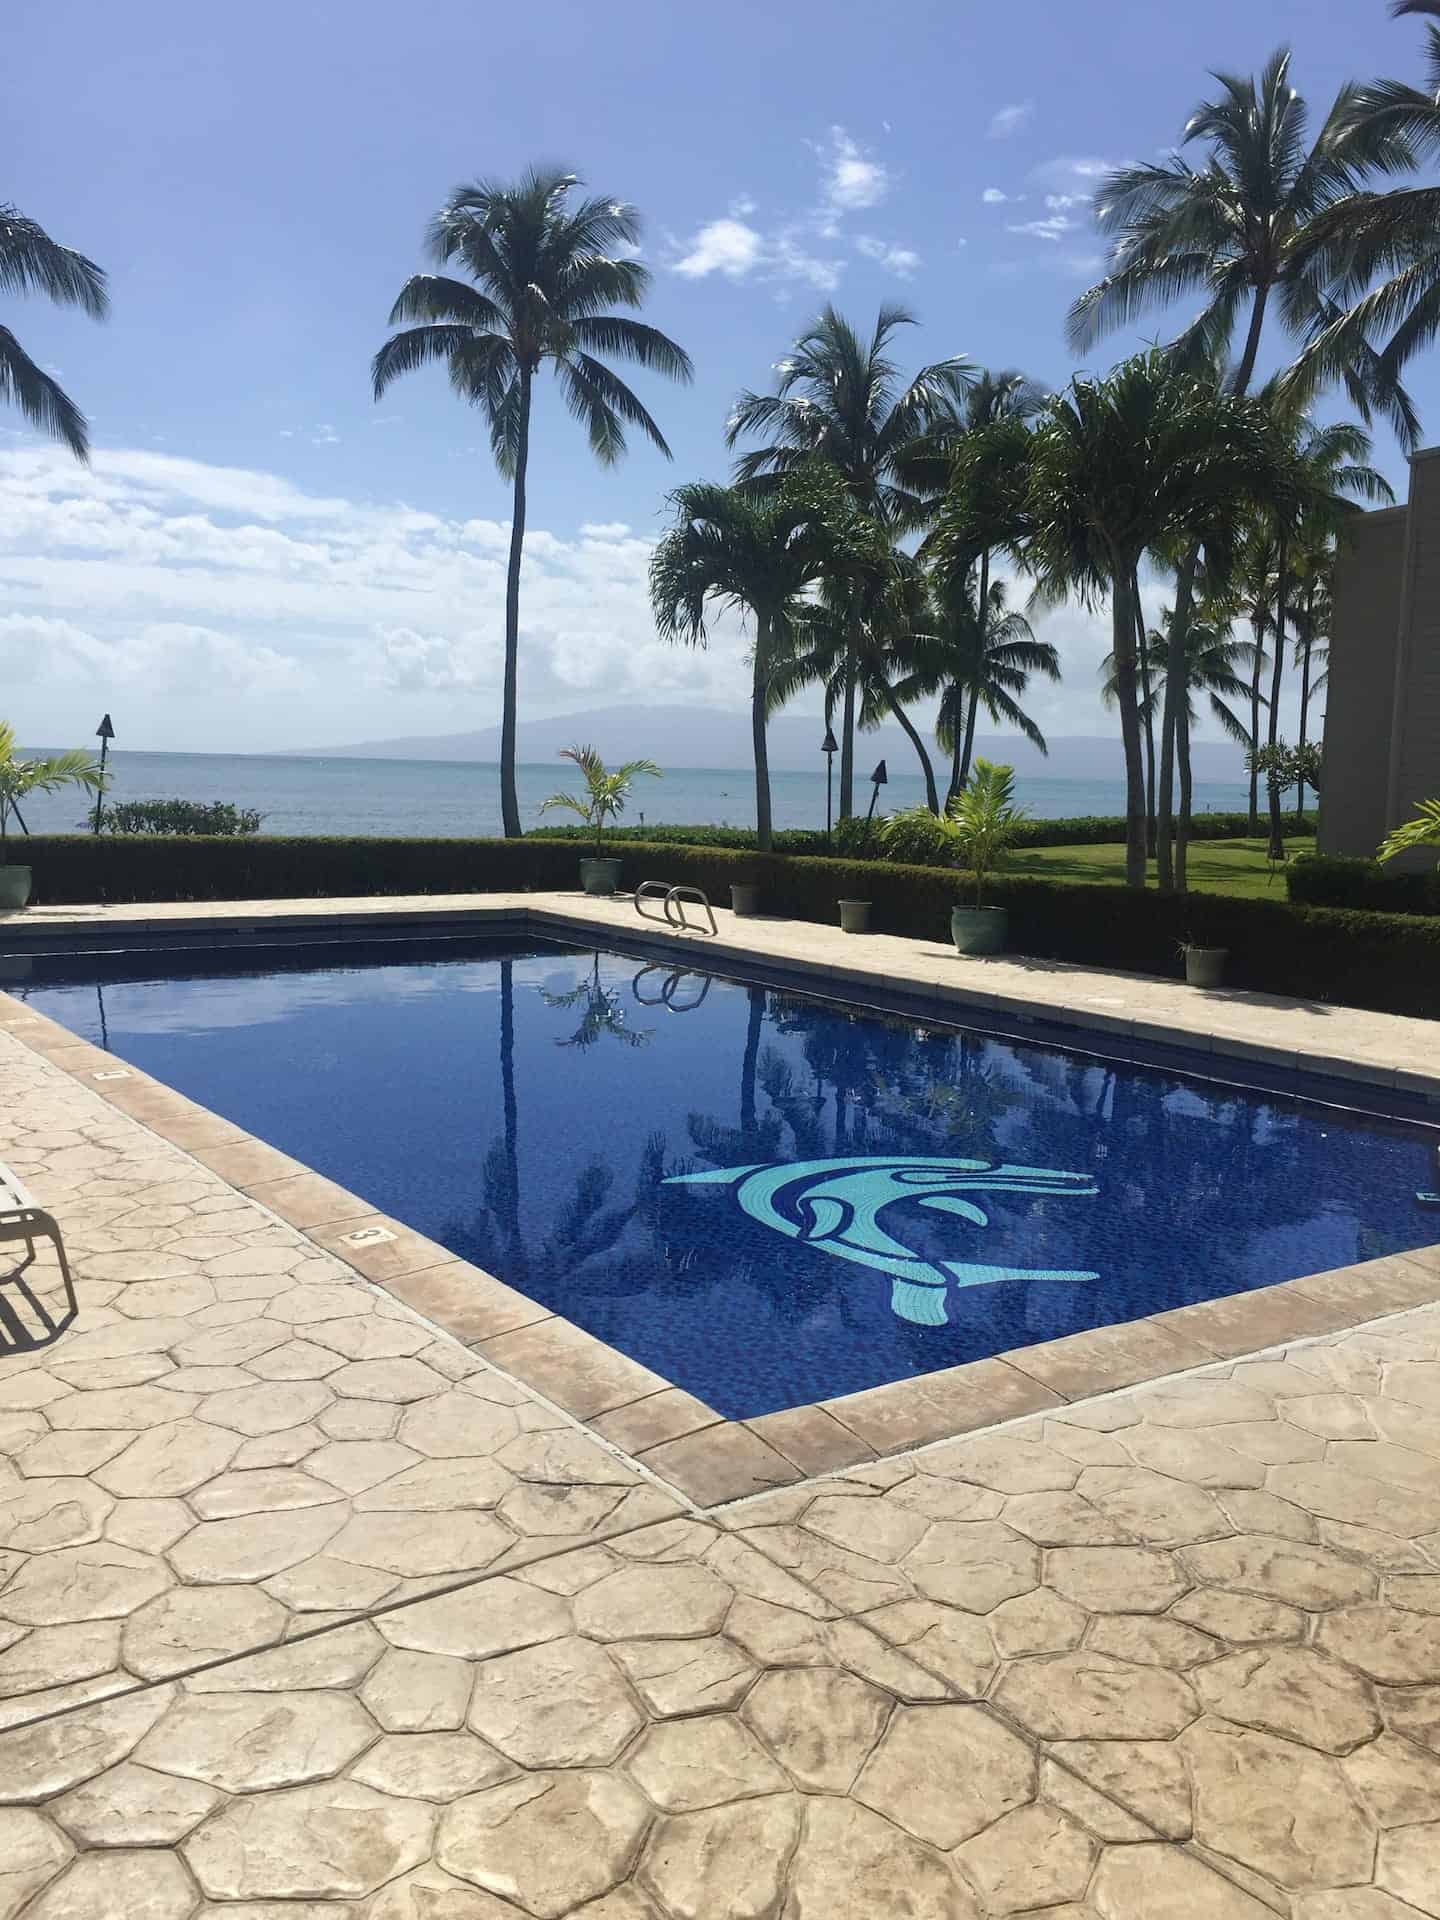 Image of Airbnb rental in Molokai